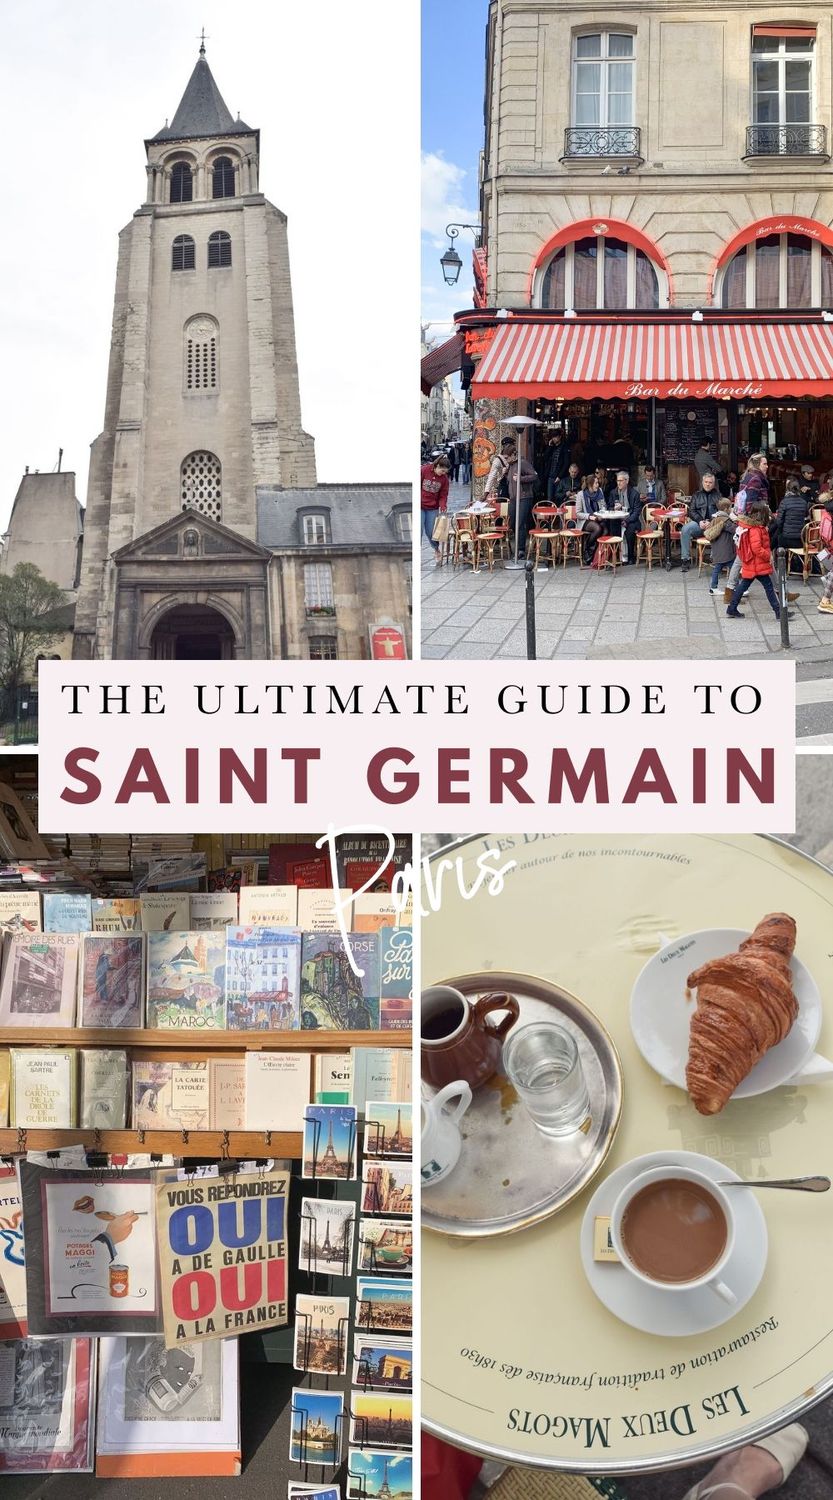 The Ultimate Guide To Saint Germain, Paris: Things to do in the 6th arrondissement of Paris, France